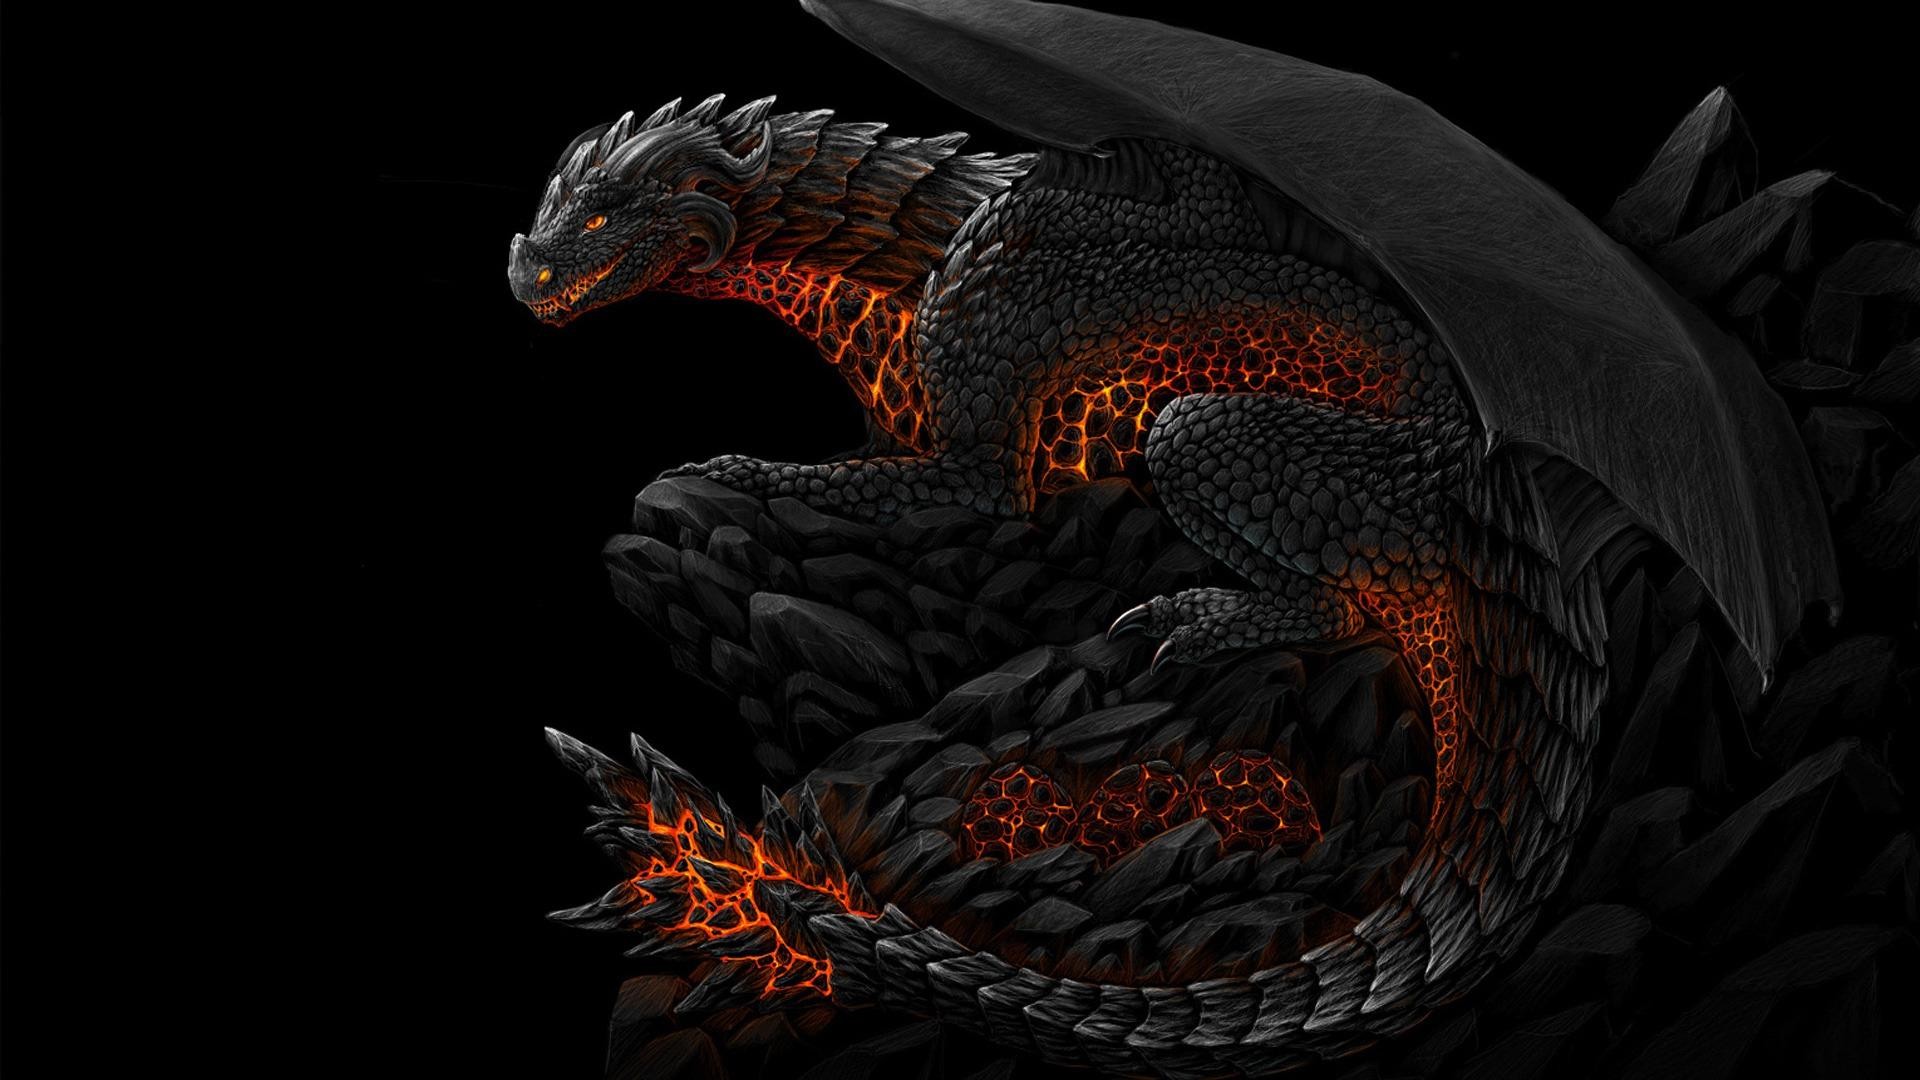 1920x1080 Image: Wallpaper-Red And Black Dragon-FV79.jpg - HD Wallpapers